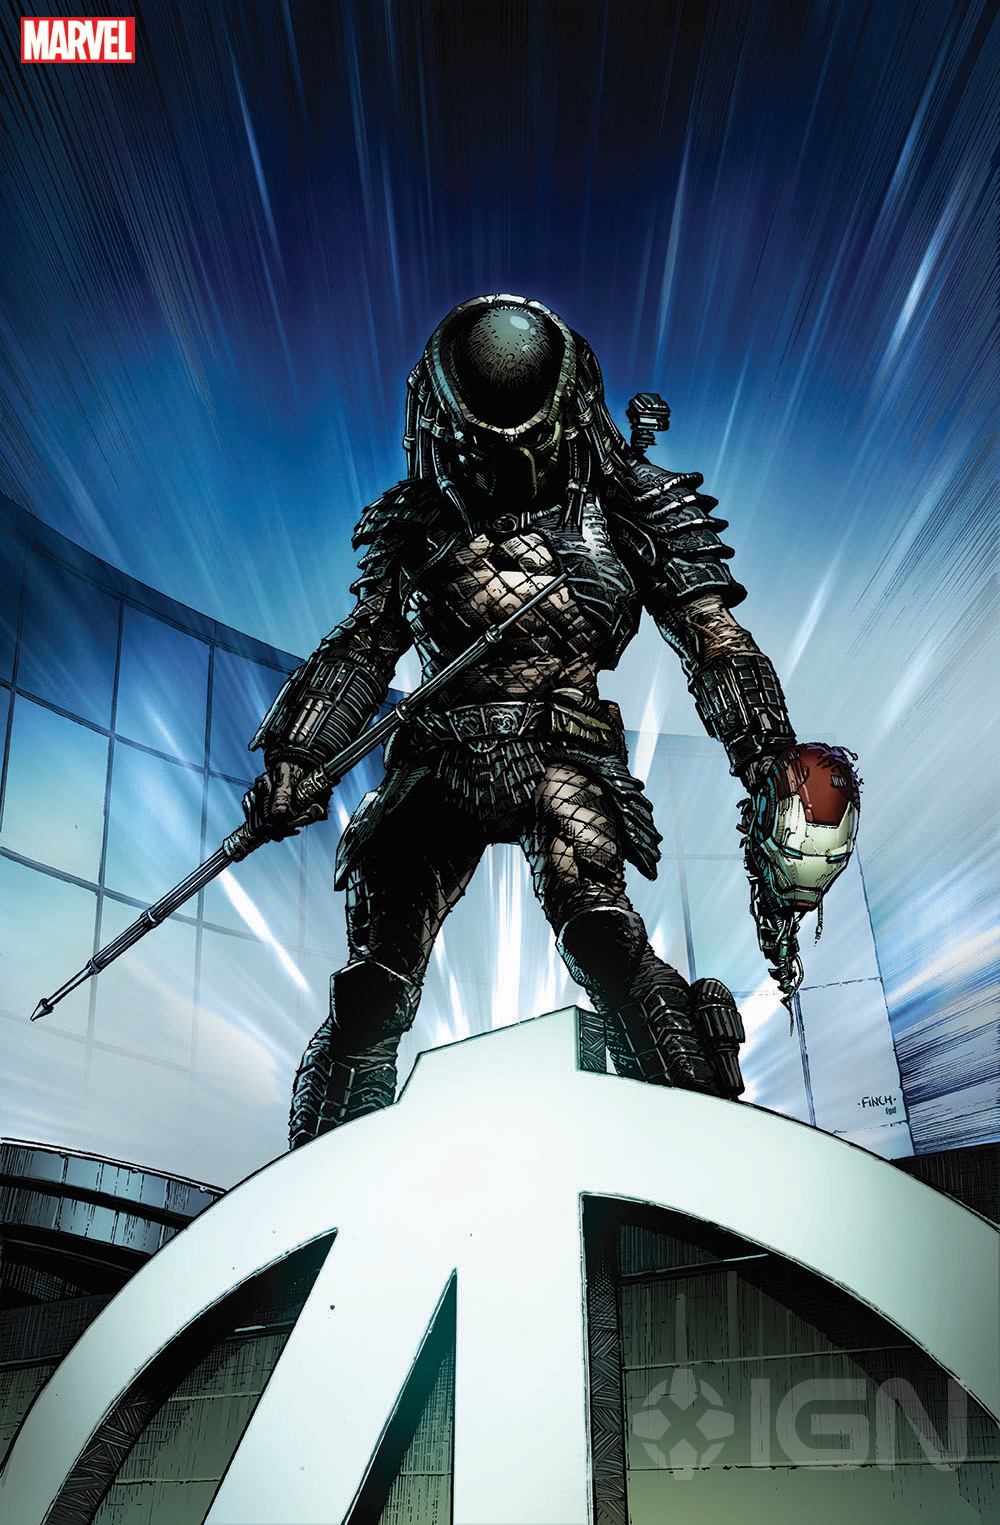 Marvel Comics Now Owns the Alien and Predator Rights